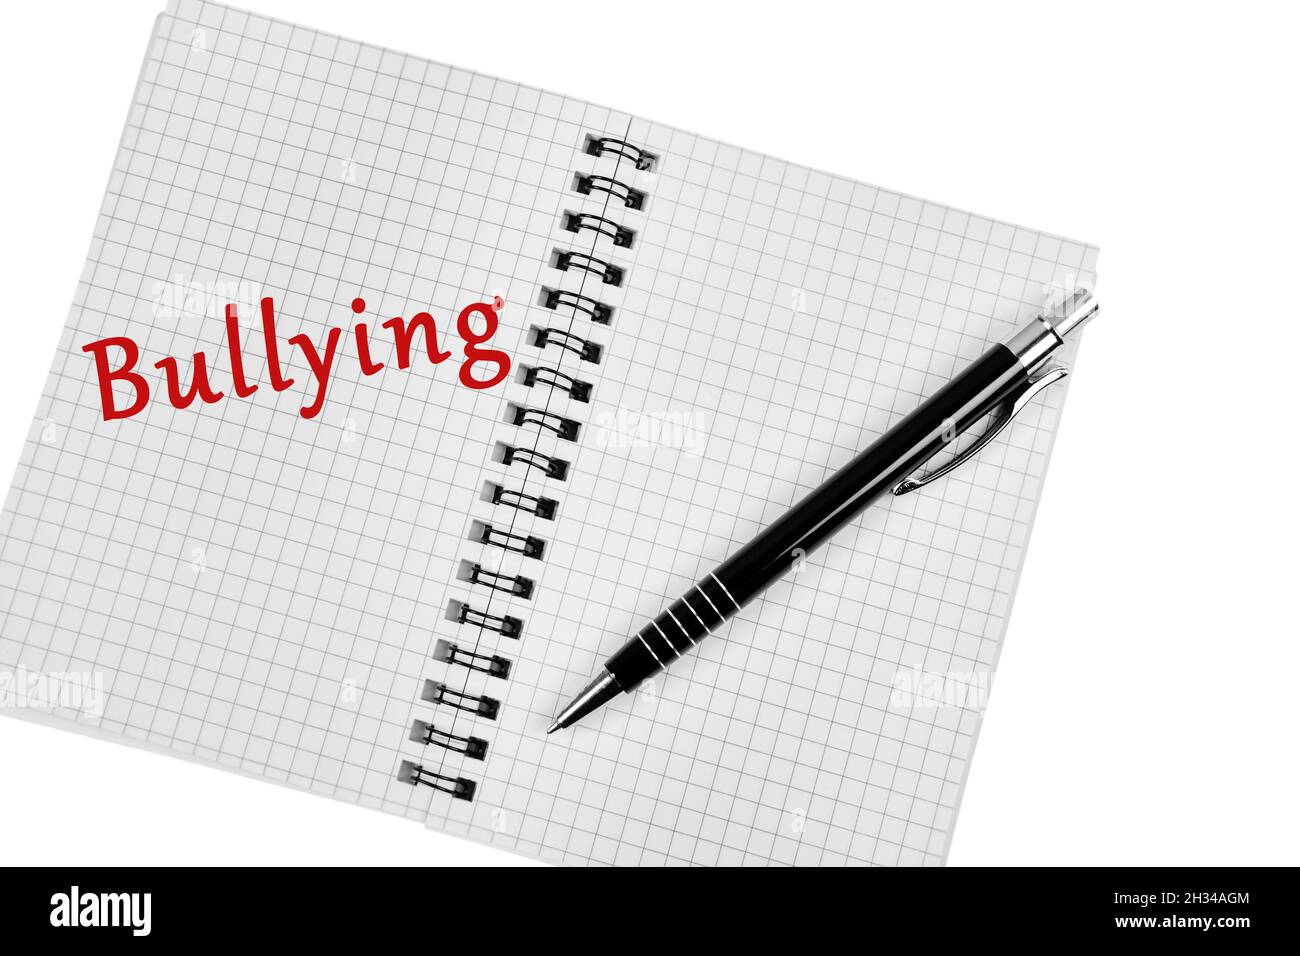 Bullying word on notebook page close-up Stock Photo